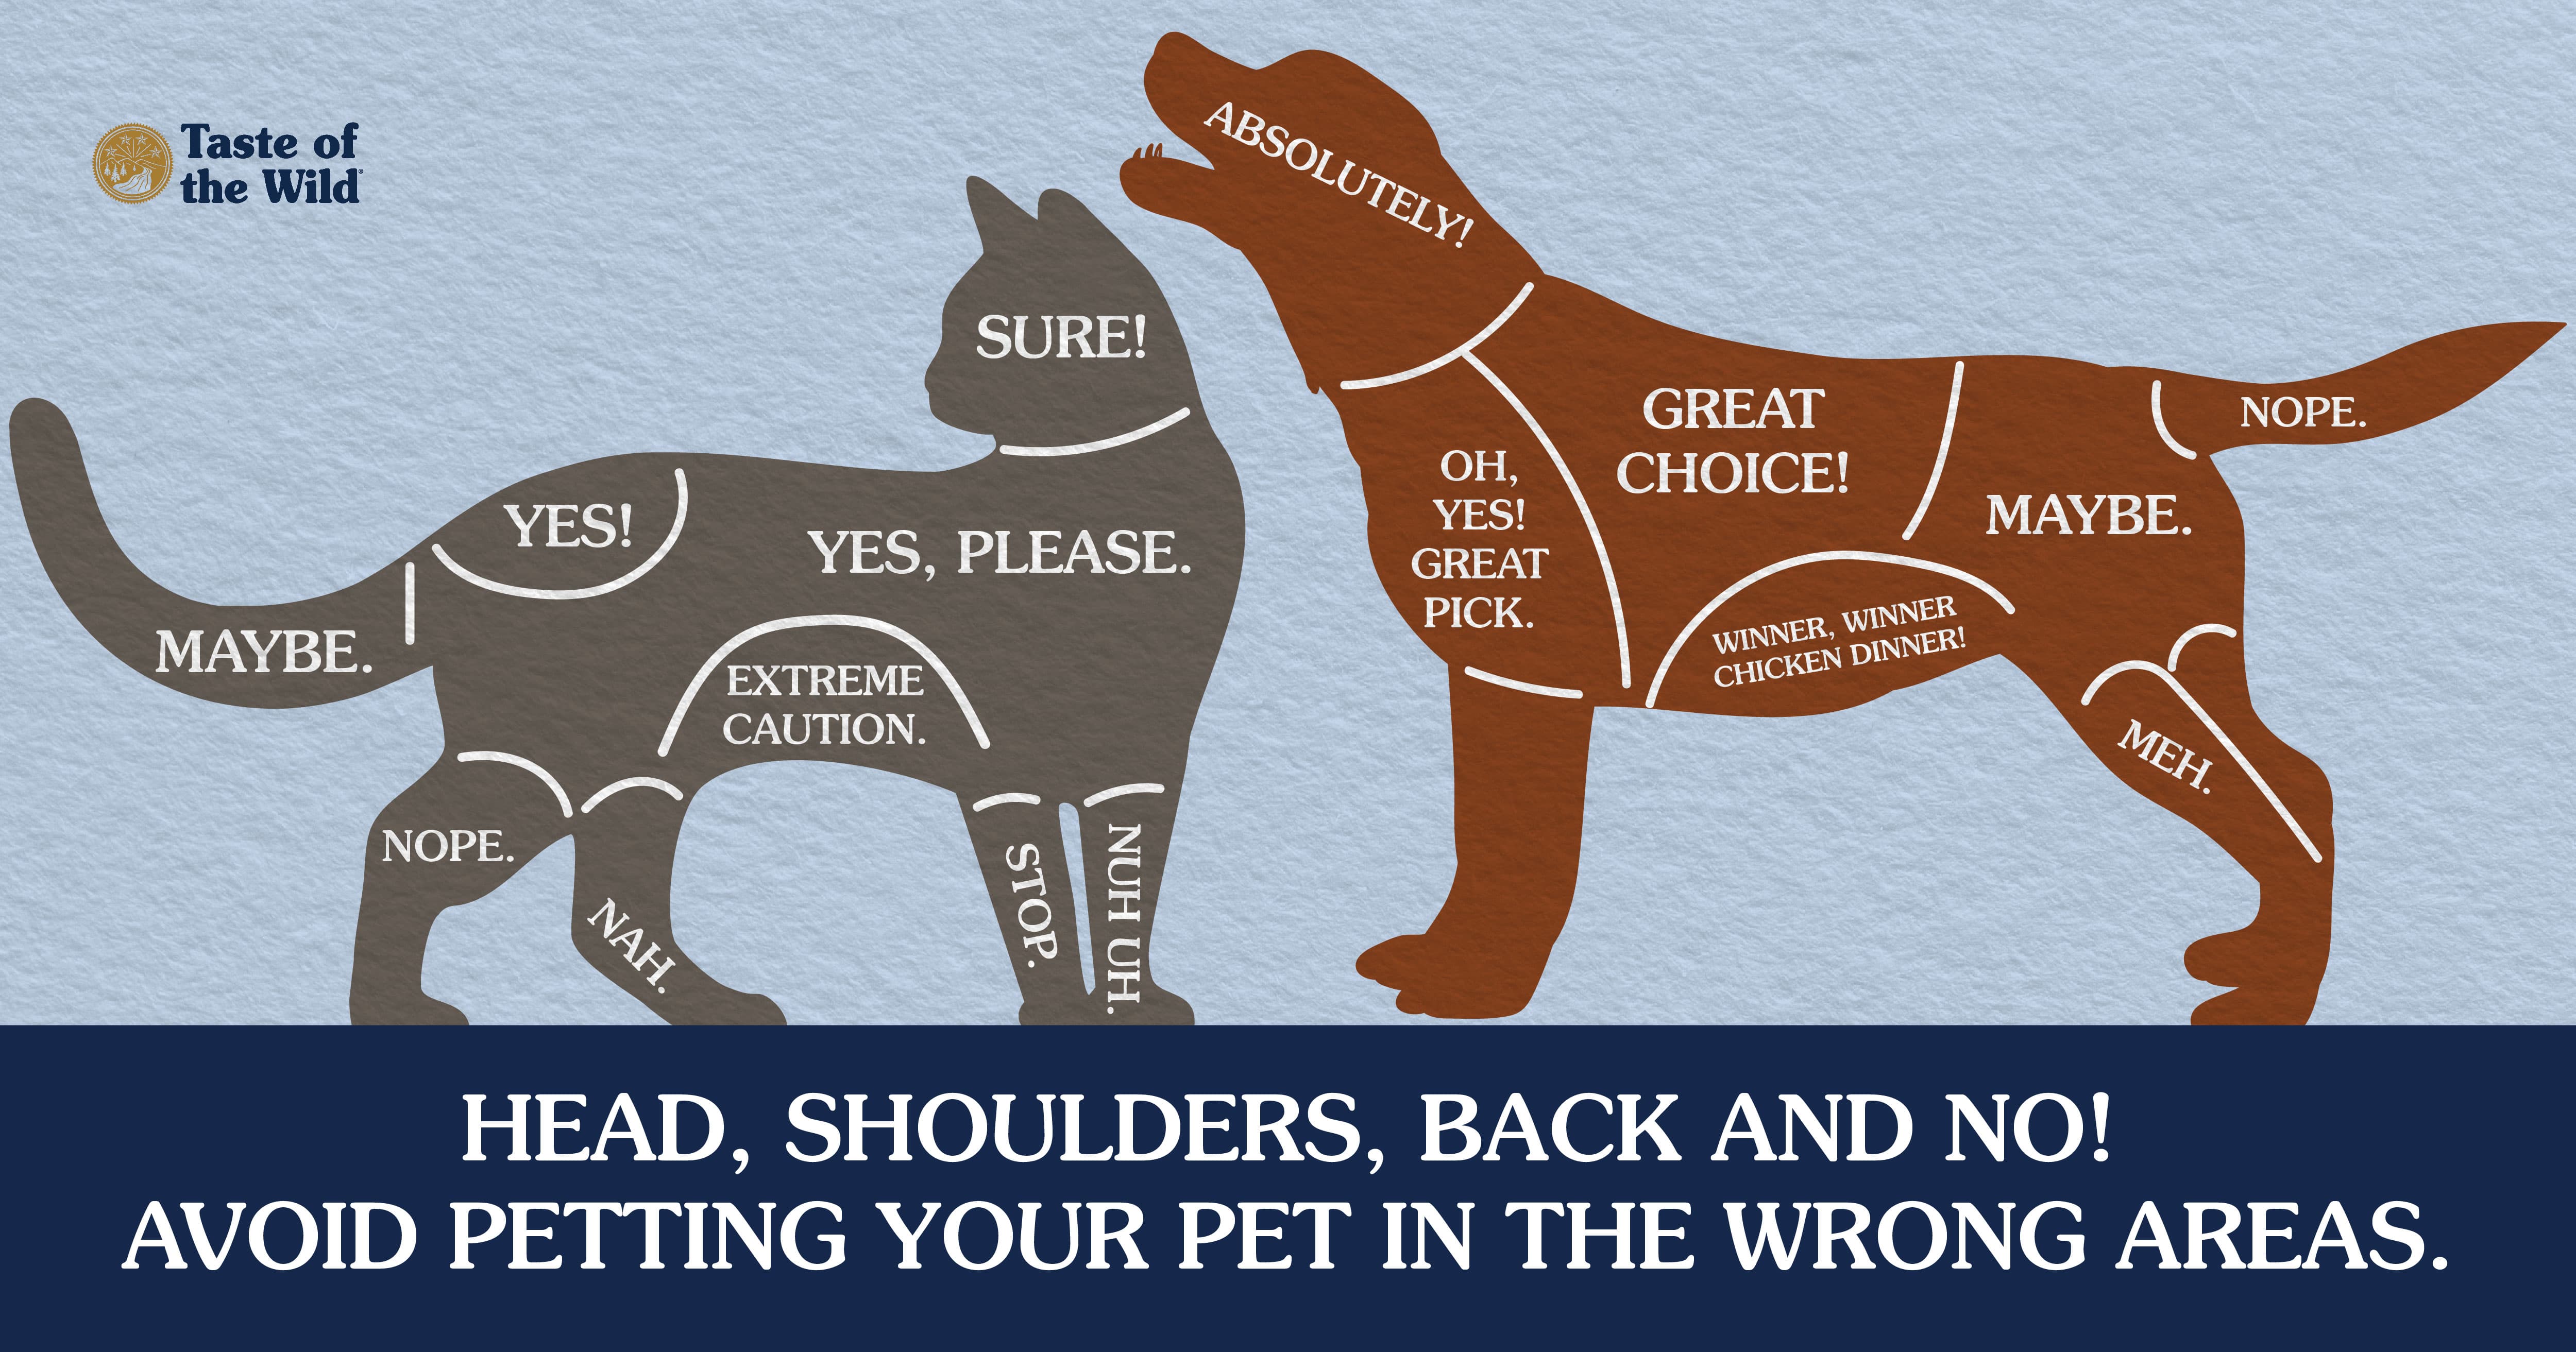 An infographic detailing which spots on a dog and cat are okay to pet and which spots are not okay.